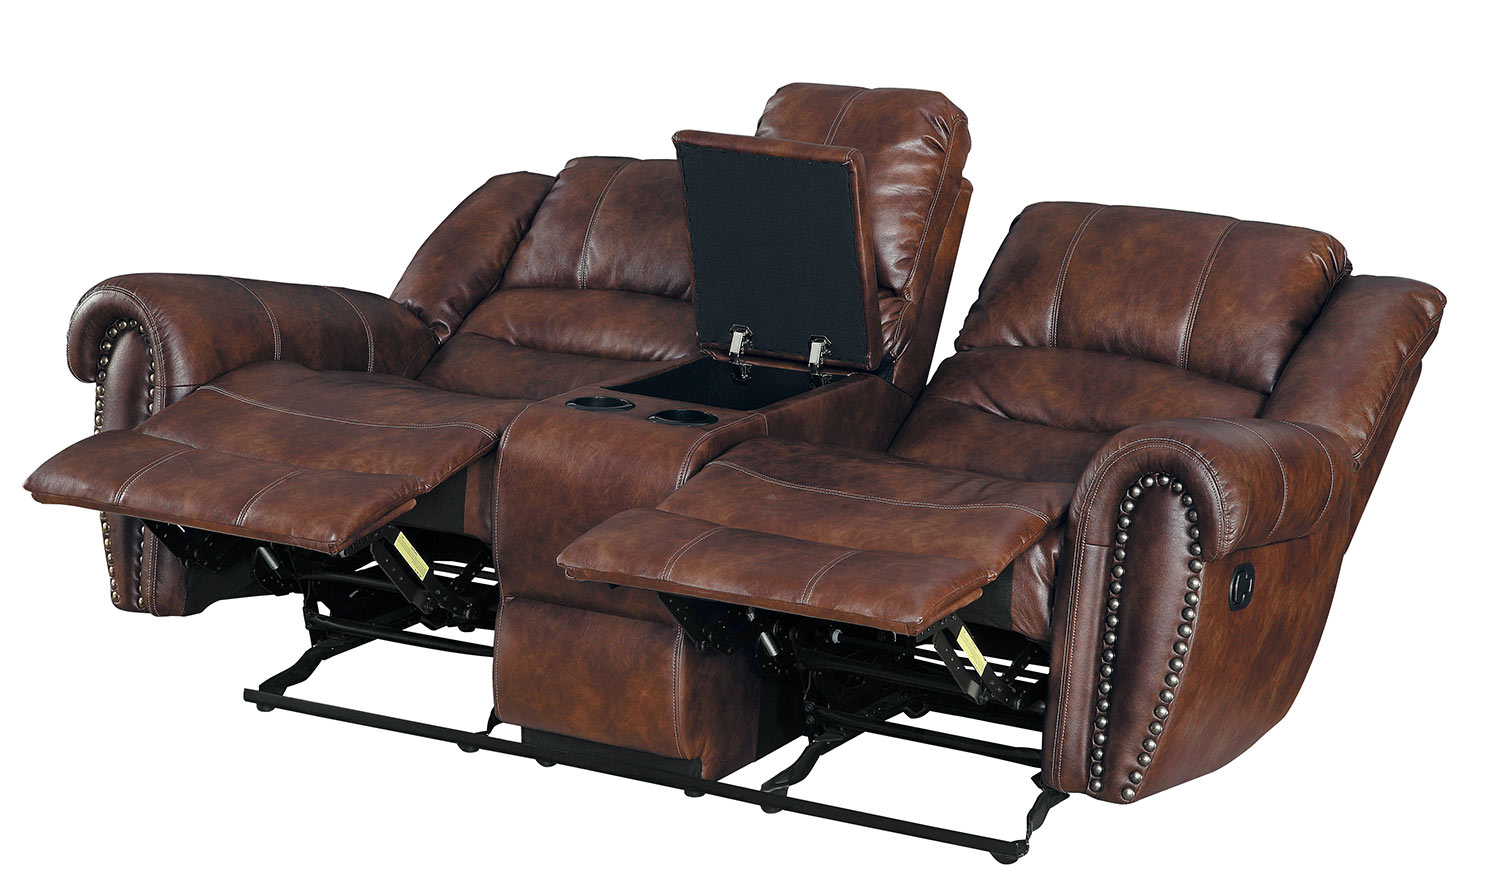 Homelegance Center Hill Double Glider Reclining Love Seat With Center Console - Dark Brown